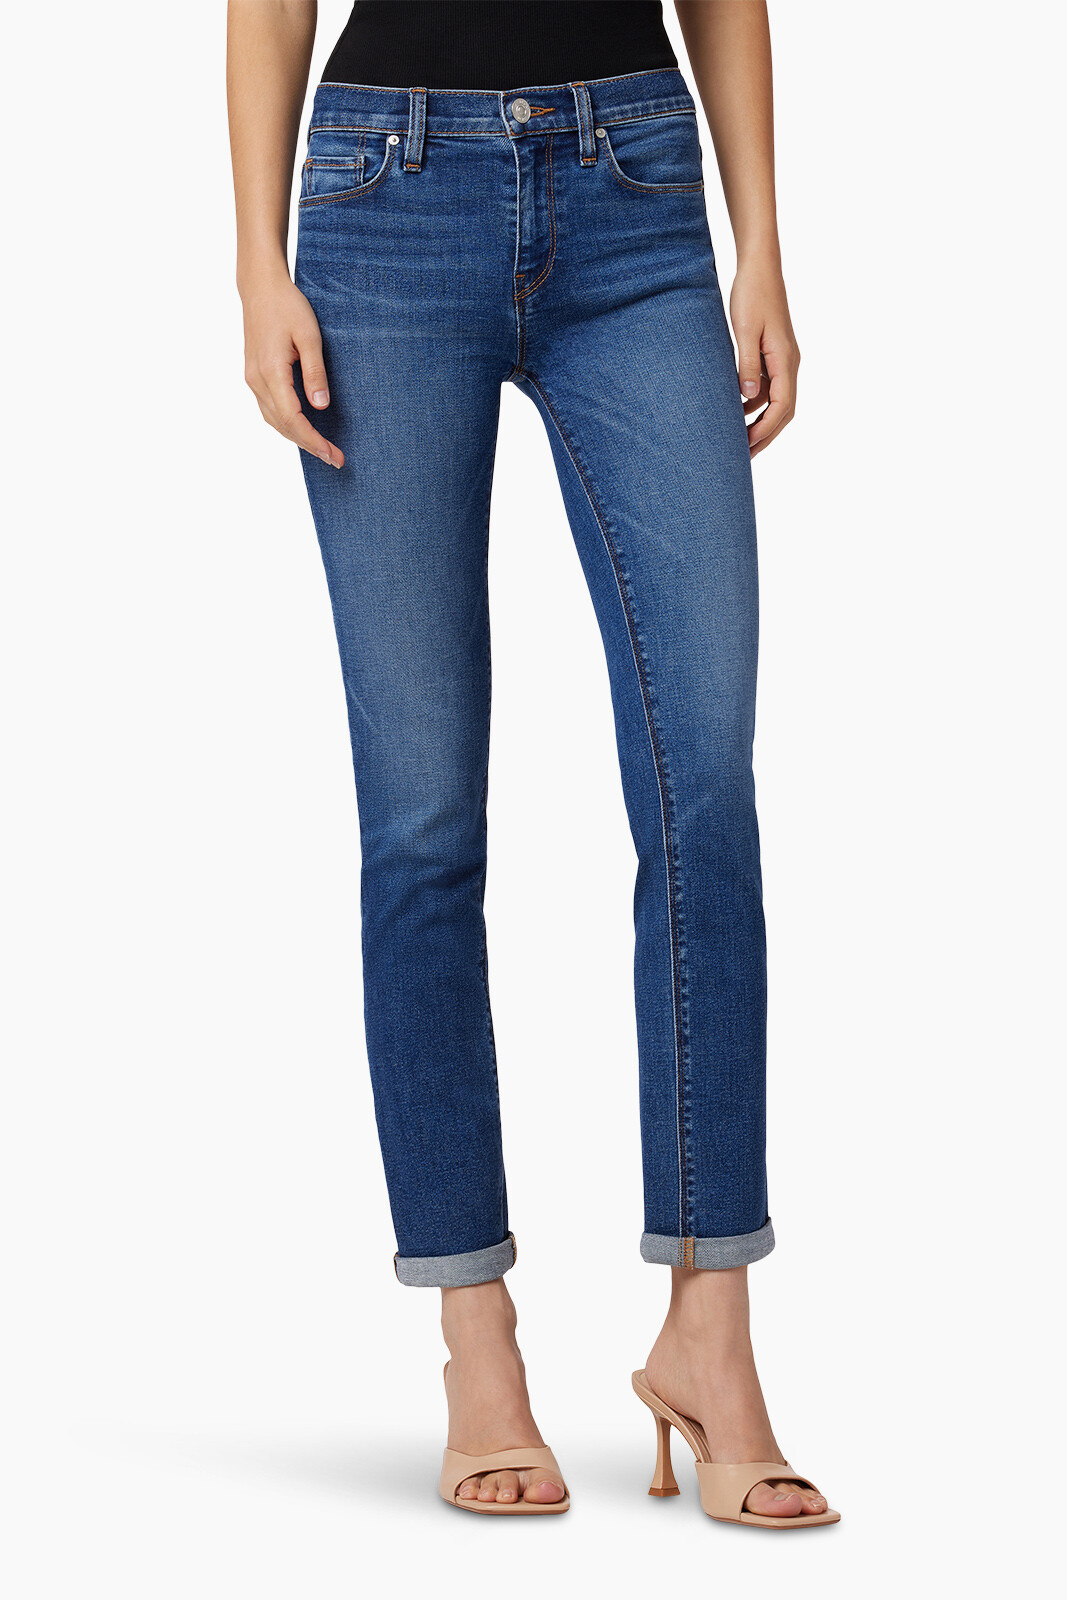 Nico Midrise Straight Jean with Rolled Hem